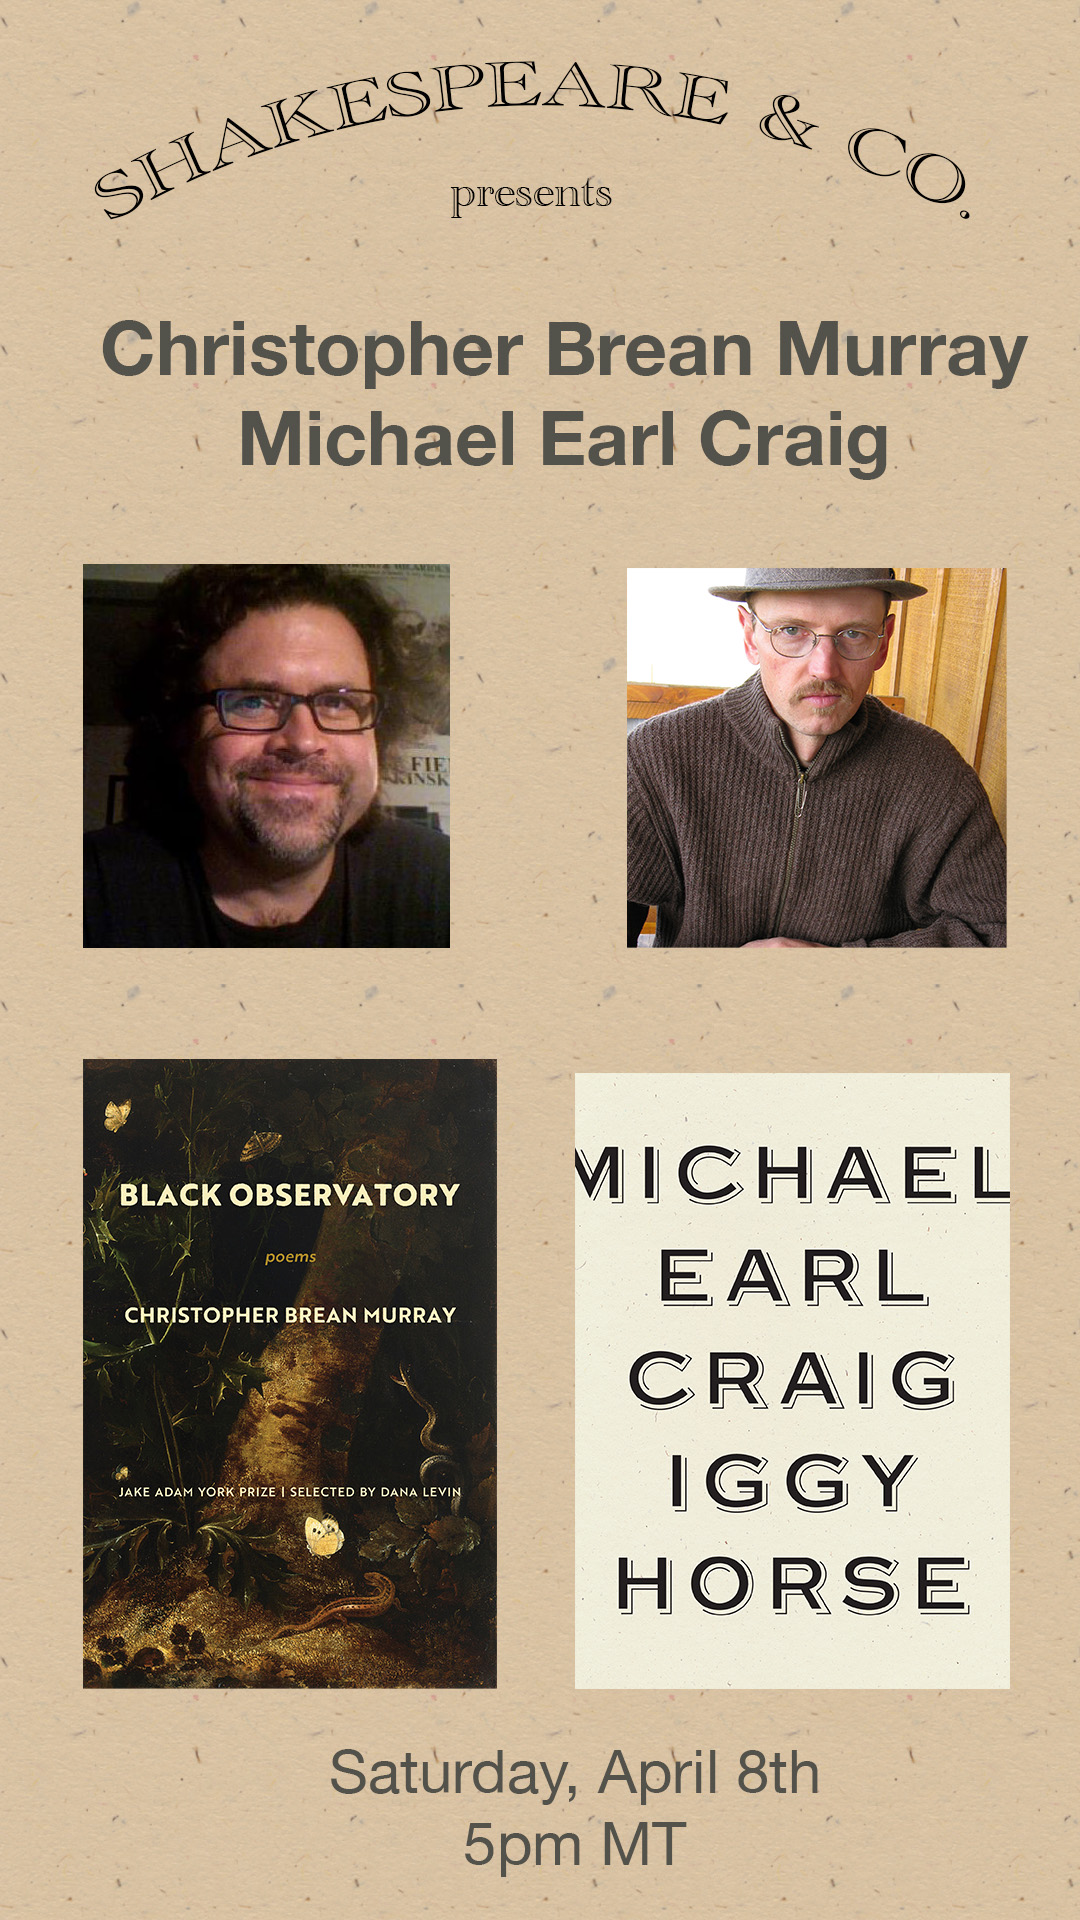 An Evening of Poetry with Christopher Brean Murray and Michael Earl Craig at Shakespeare & Co. in Missoula, Montana